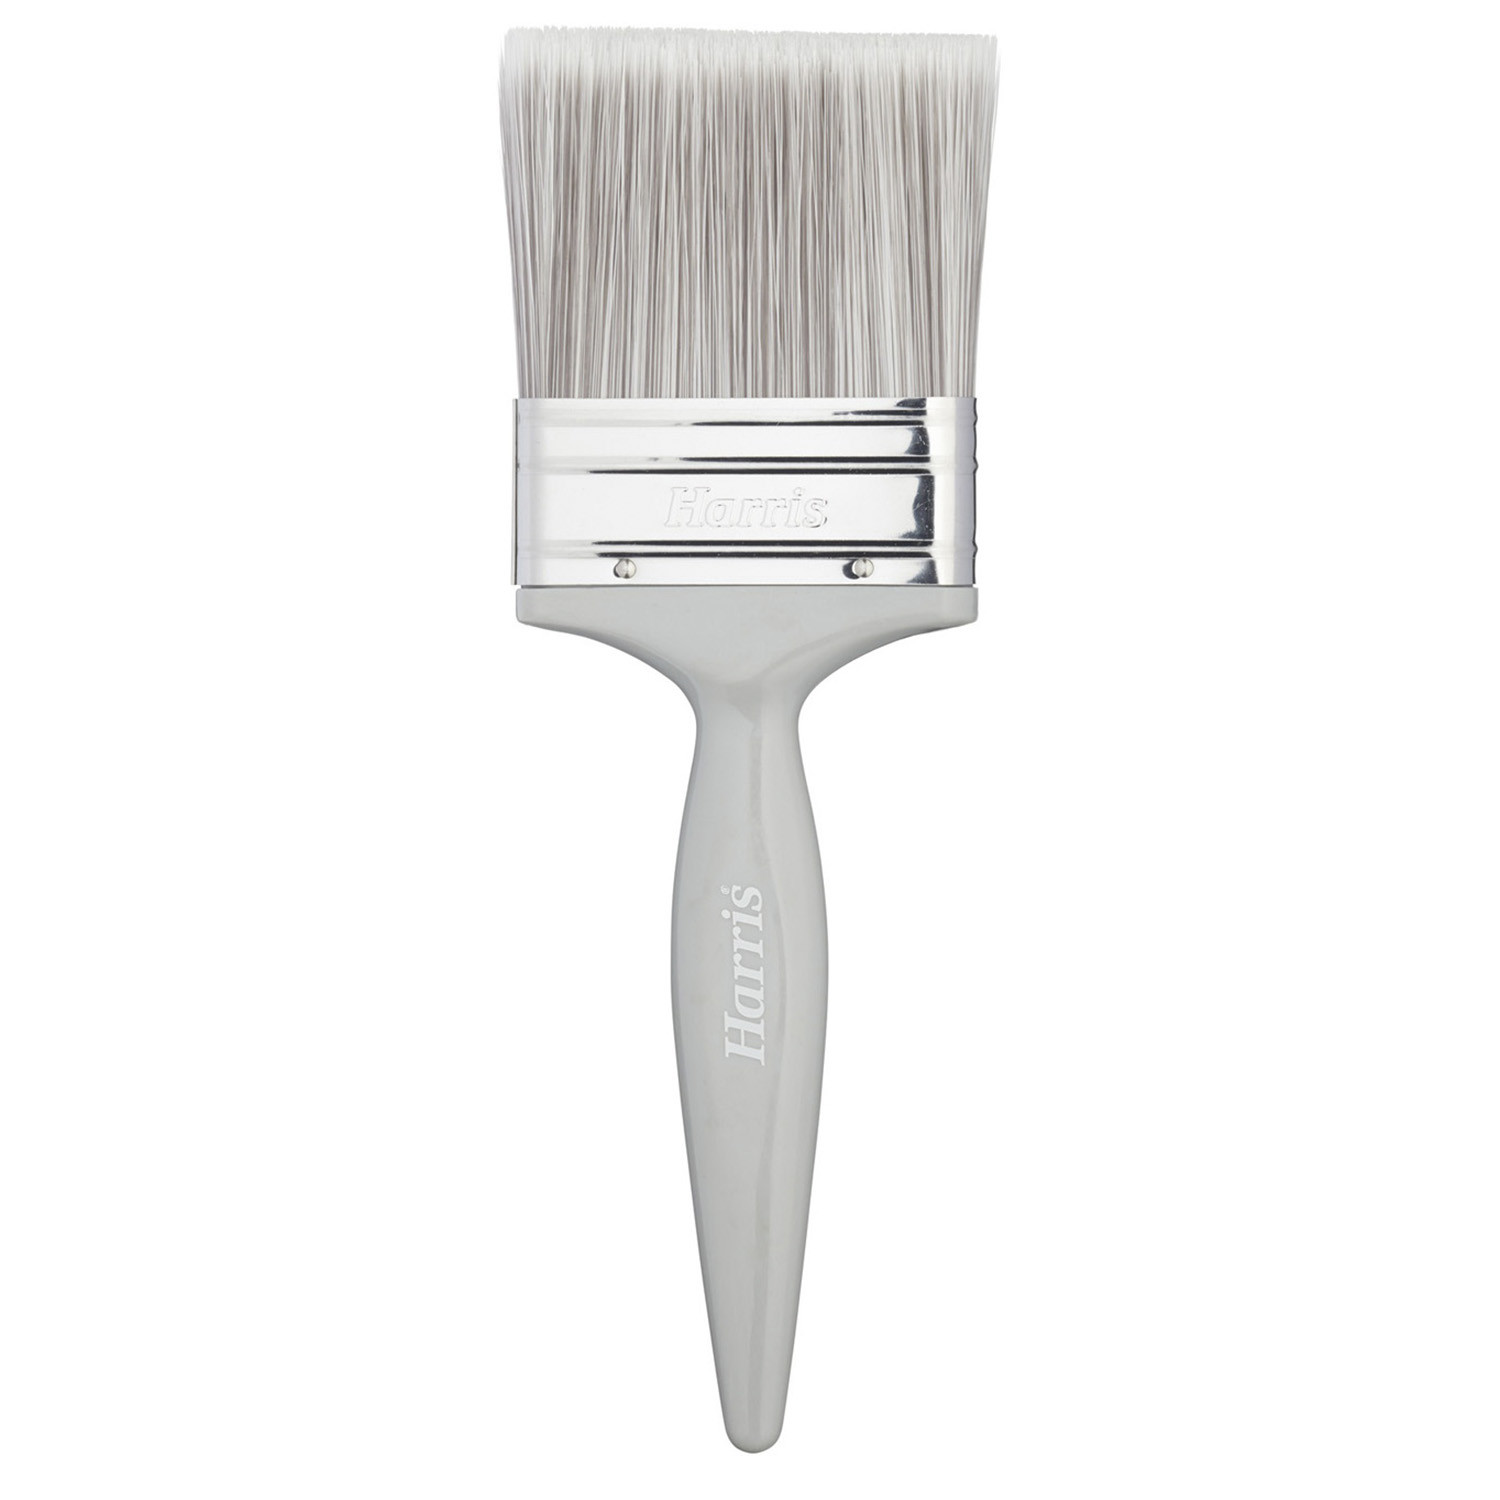 Harris 3 inch Essentials Walls and Ceilings Paint Brush Image 2